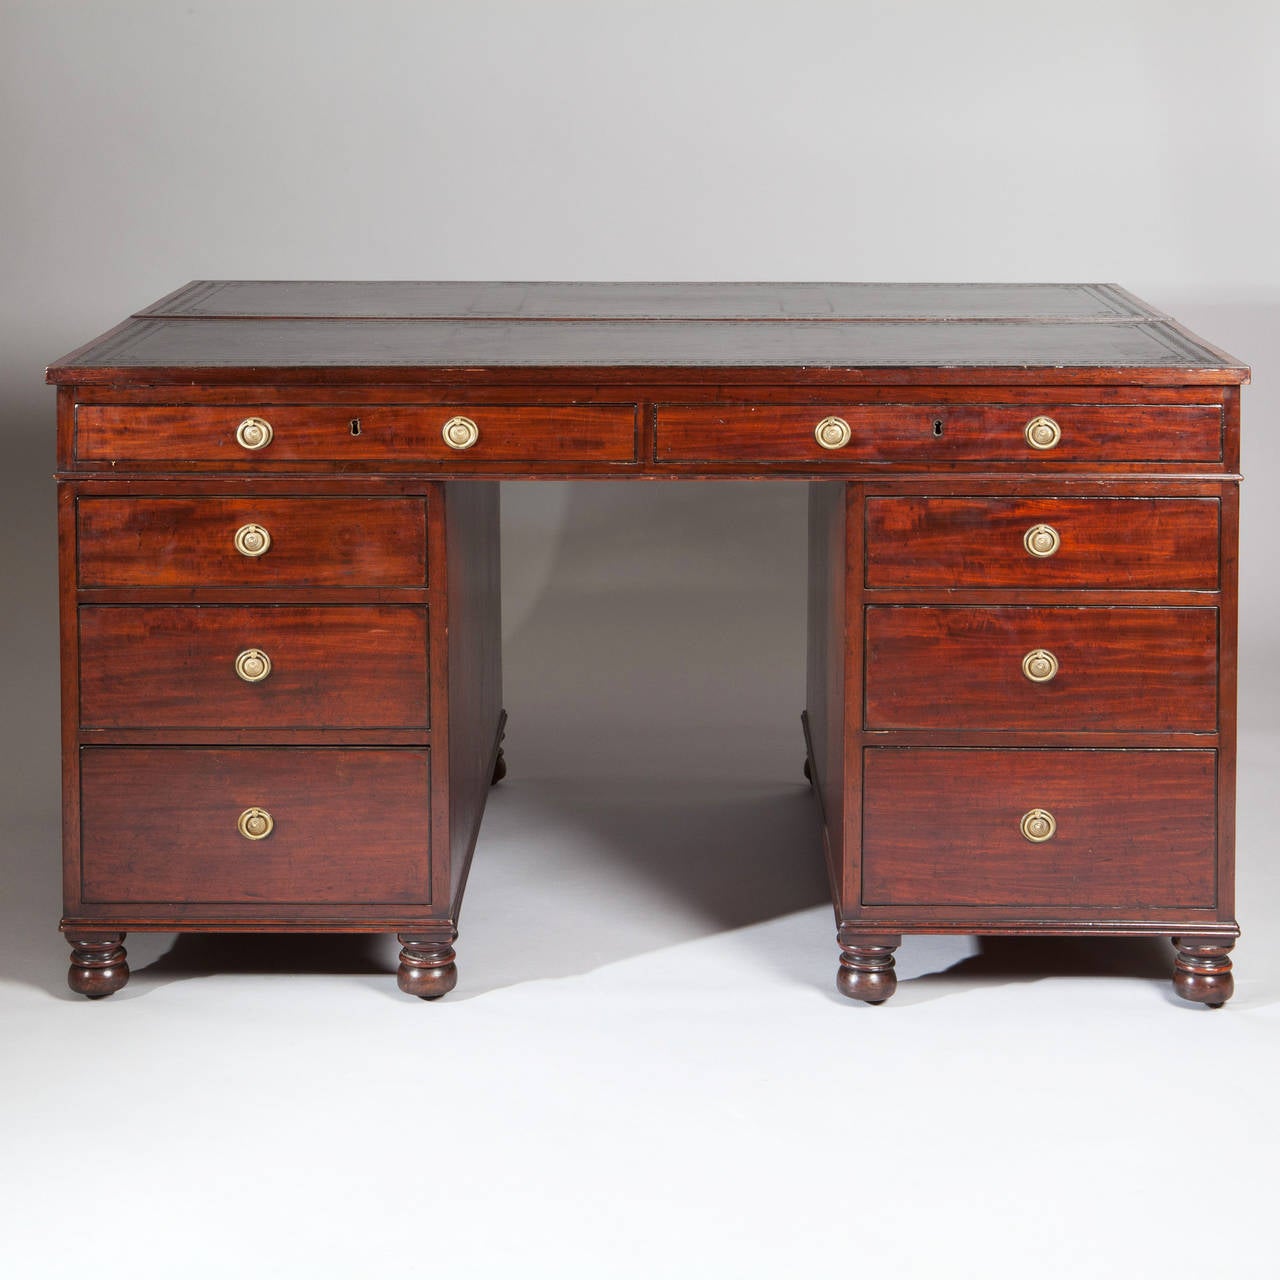 18th Century Pedestal Architect's or Library Desk In Excellent Condition In London, by appointment only